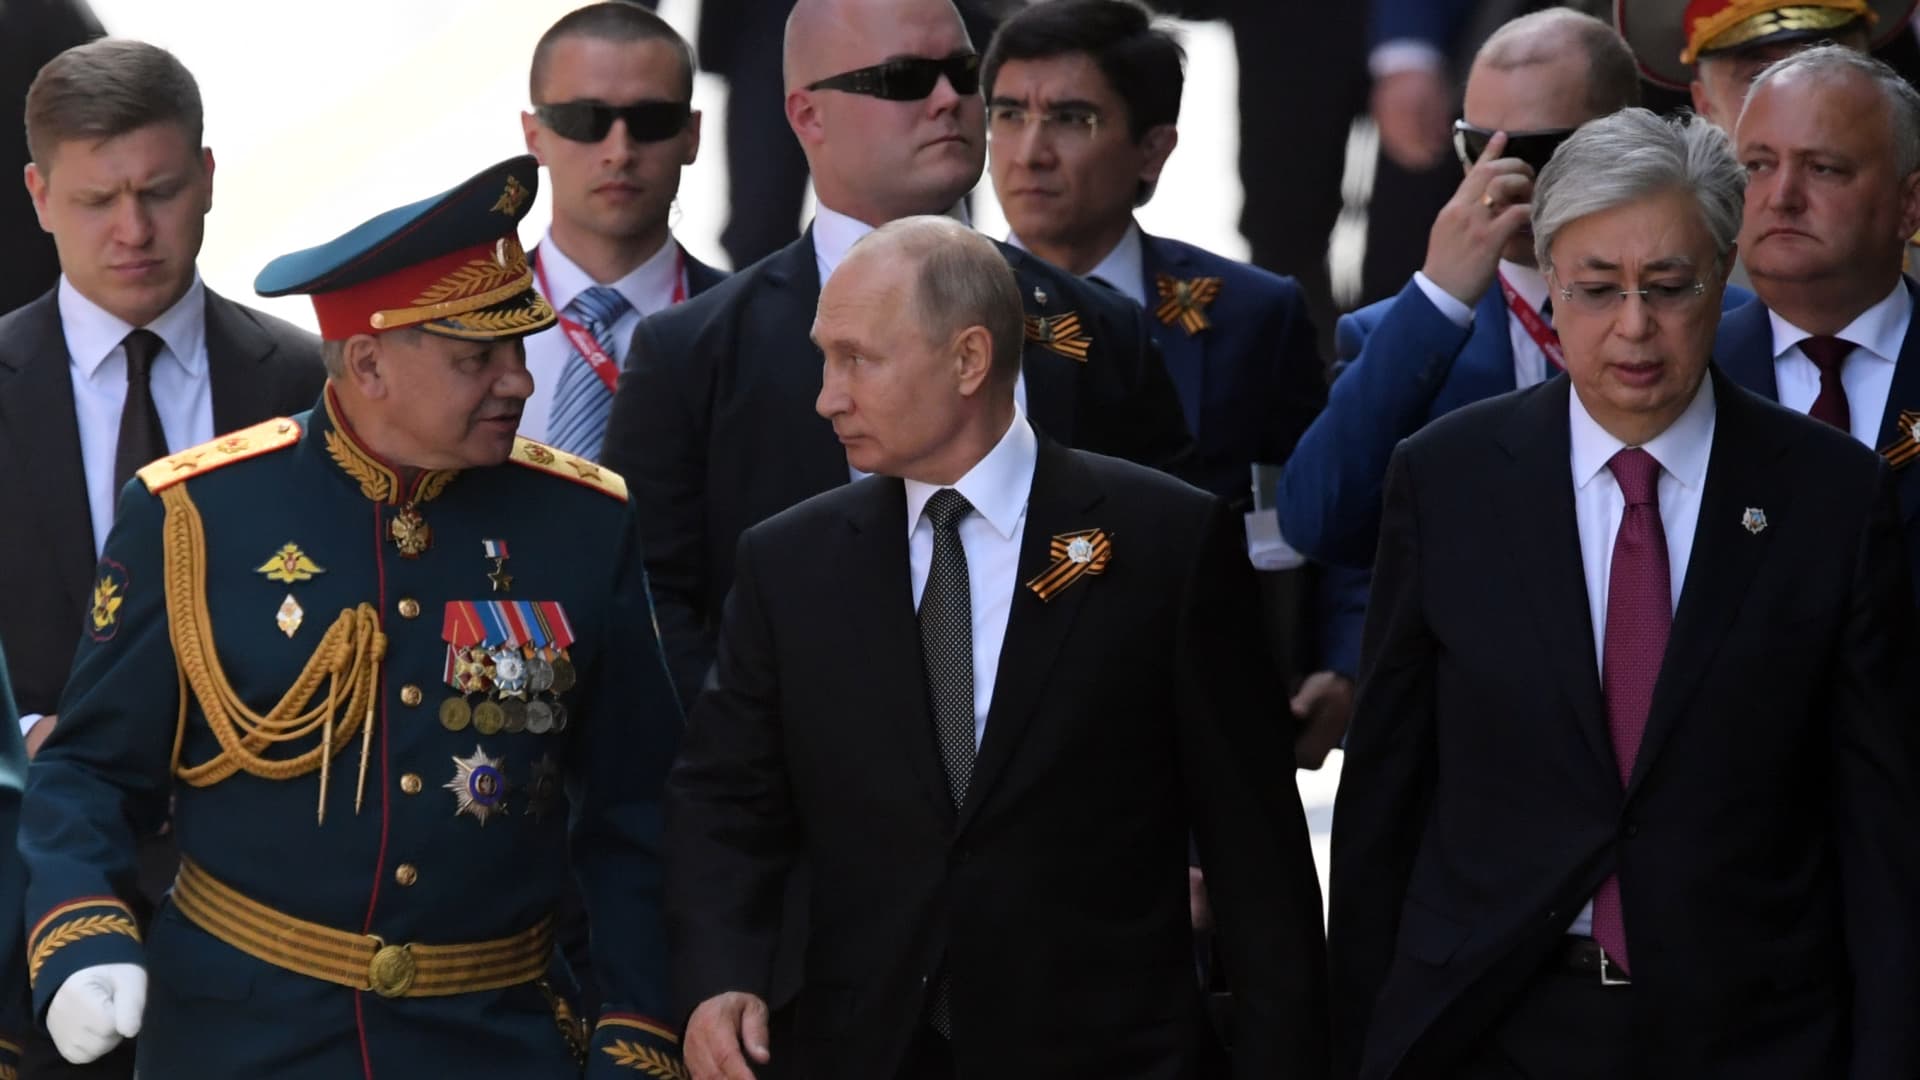 Russian President of Russia and Commander-in-Chief of the Armed Forces Vladimir Putin (C) and Russian Defense Minister Sergei Shoigu (L) and President of Kazakhstan Kassym-Jomart Tokayev (R) during a Victory Day military parade marking the 75th anniversary of the victory in World War II, on June 24, 2020 in Moscow, Russia.